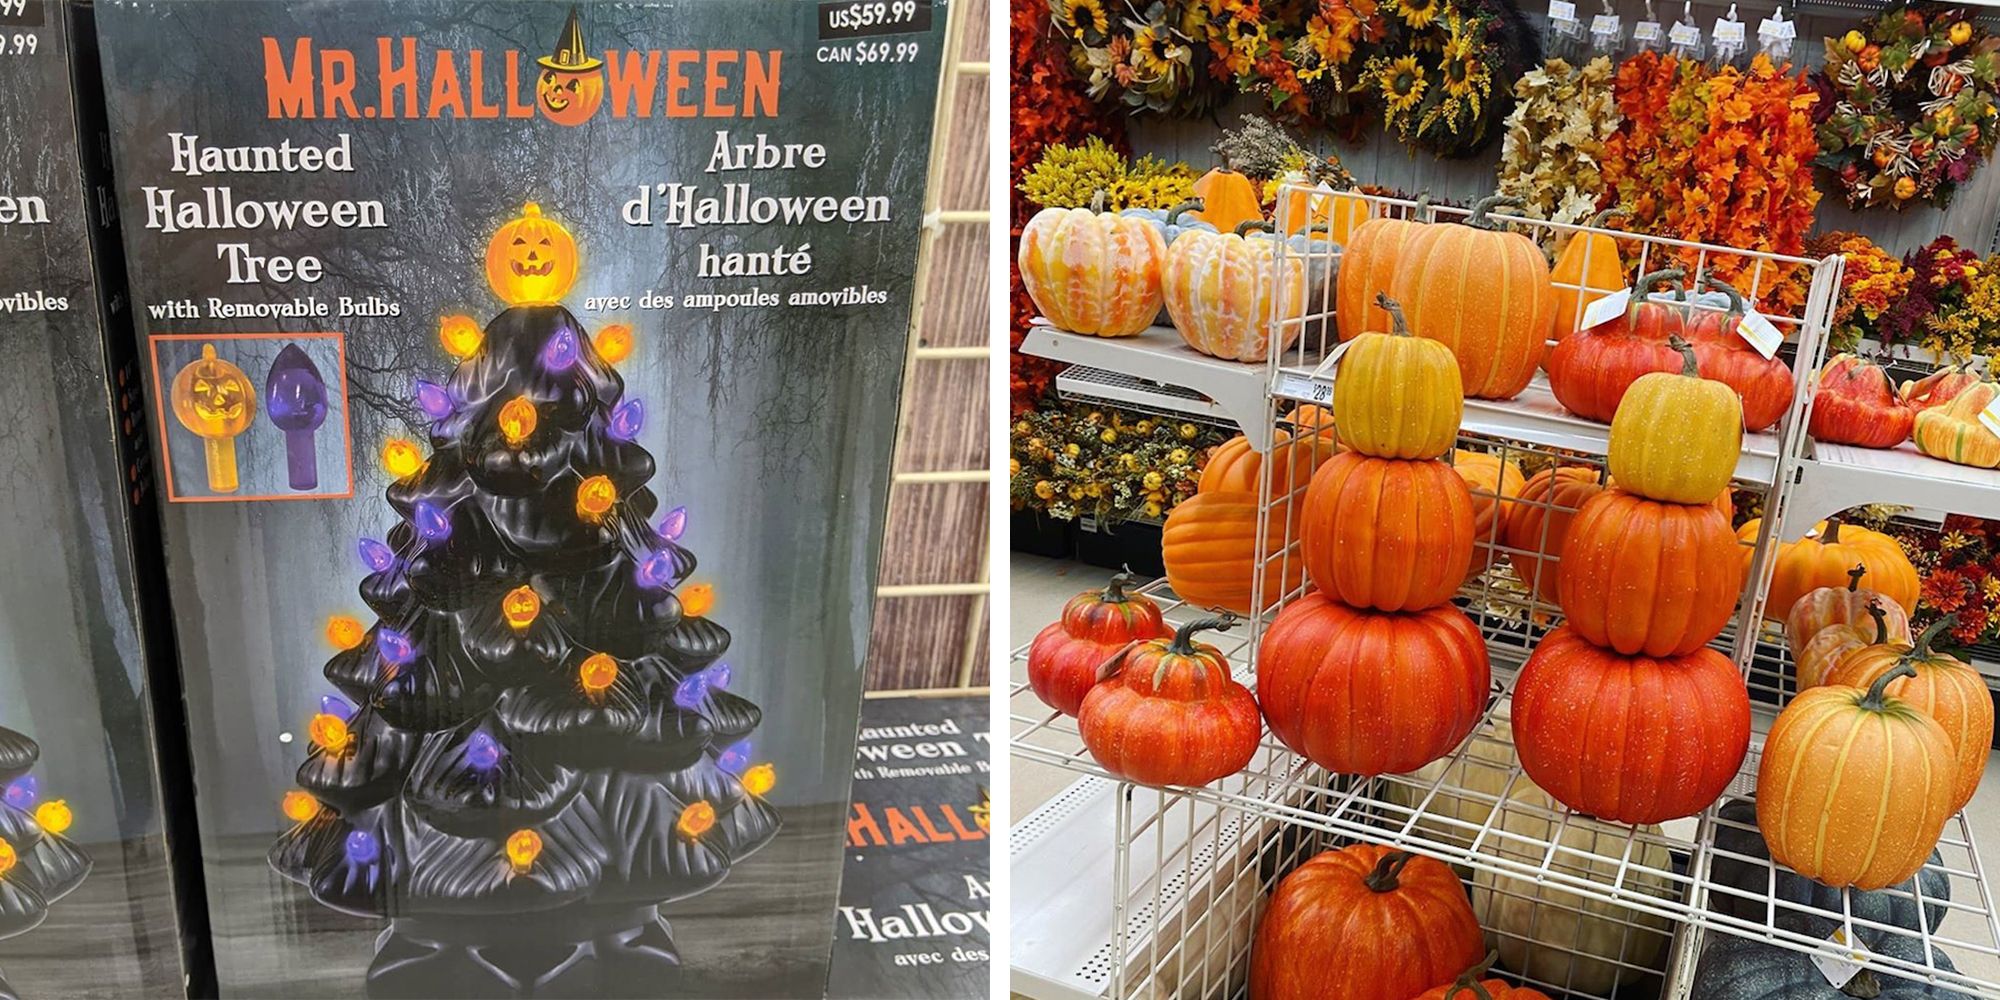 ashland halloween decor 2020 Michaels Just Released Its Halloween Collection So We Re Ready To Decorate ashland halloween decor 2020